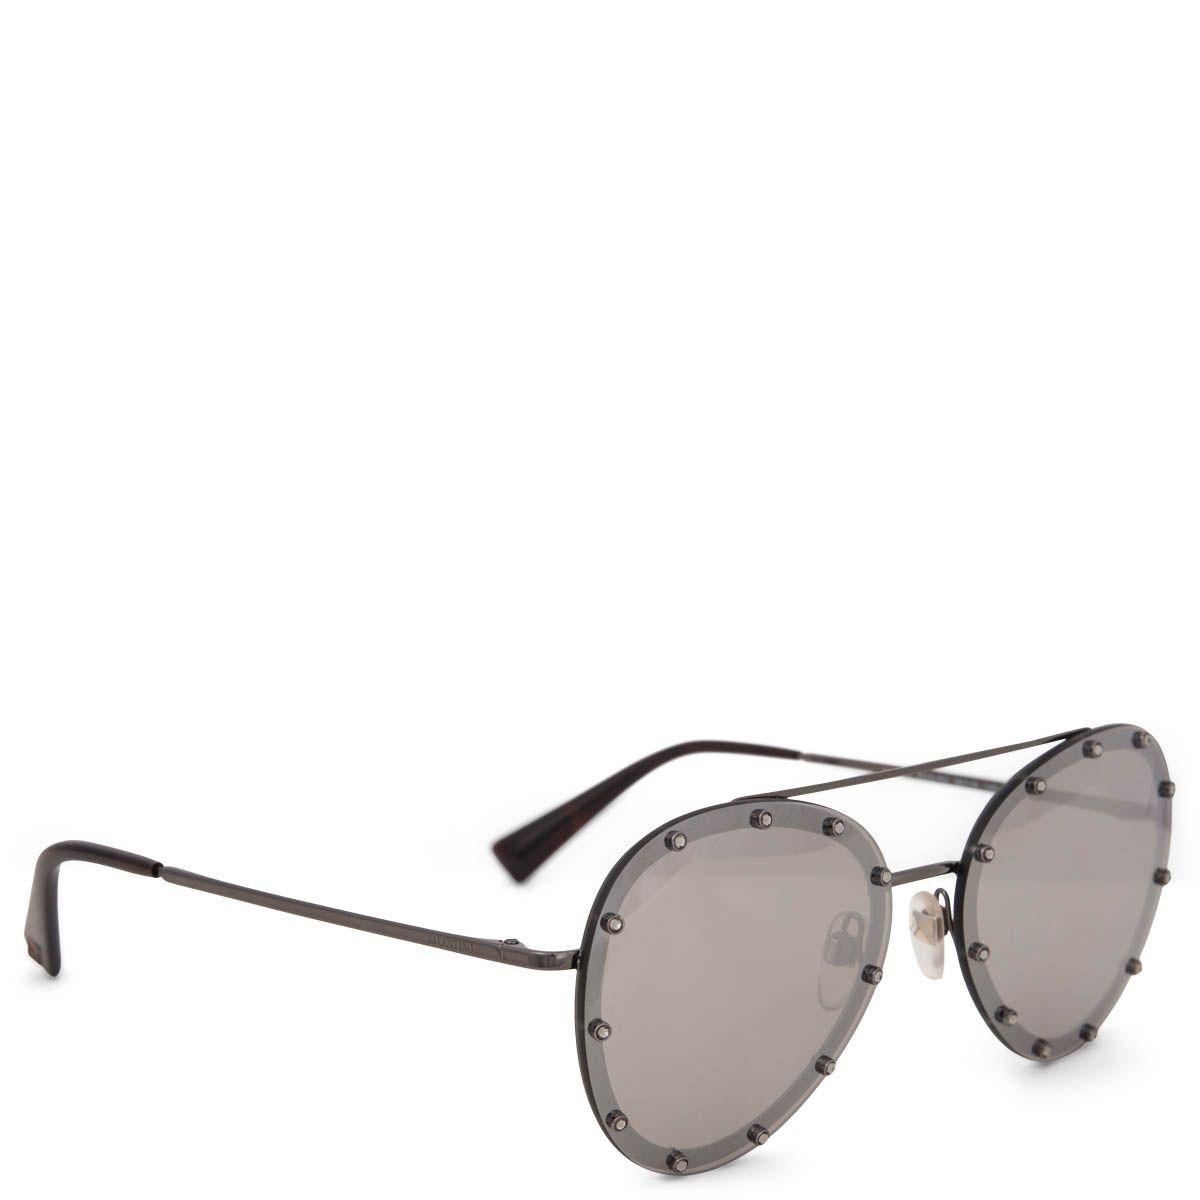 100% authentic Valentino VA 2013 aviator sunglasses featuring mirror lenses embellished with 22 hand-applied Austrian-crystal studs. Have been worn and are in excellent condition. 

Measurements
Model	VA 2013 3005/6G
Width	14cm (5.5in)
Height	5.5cm